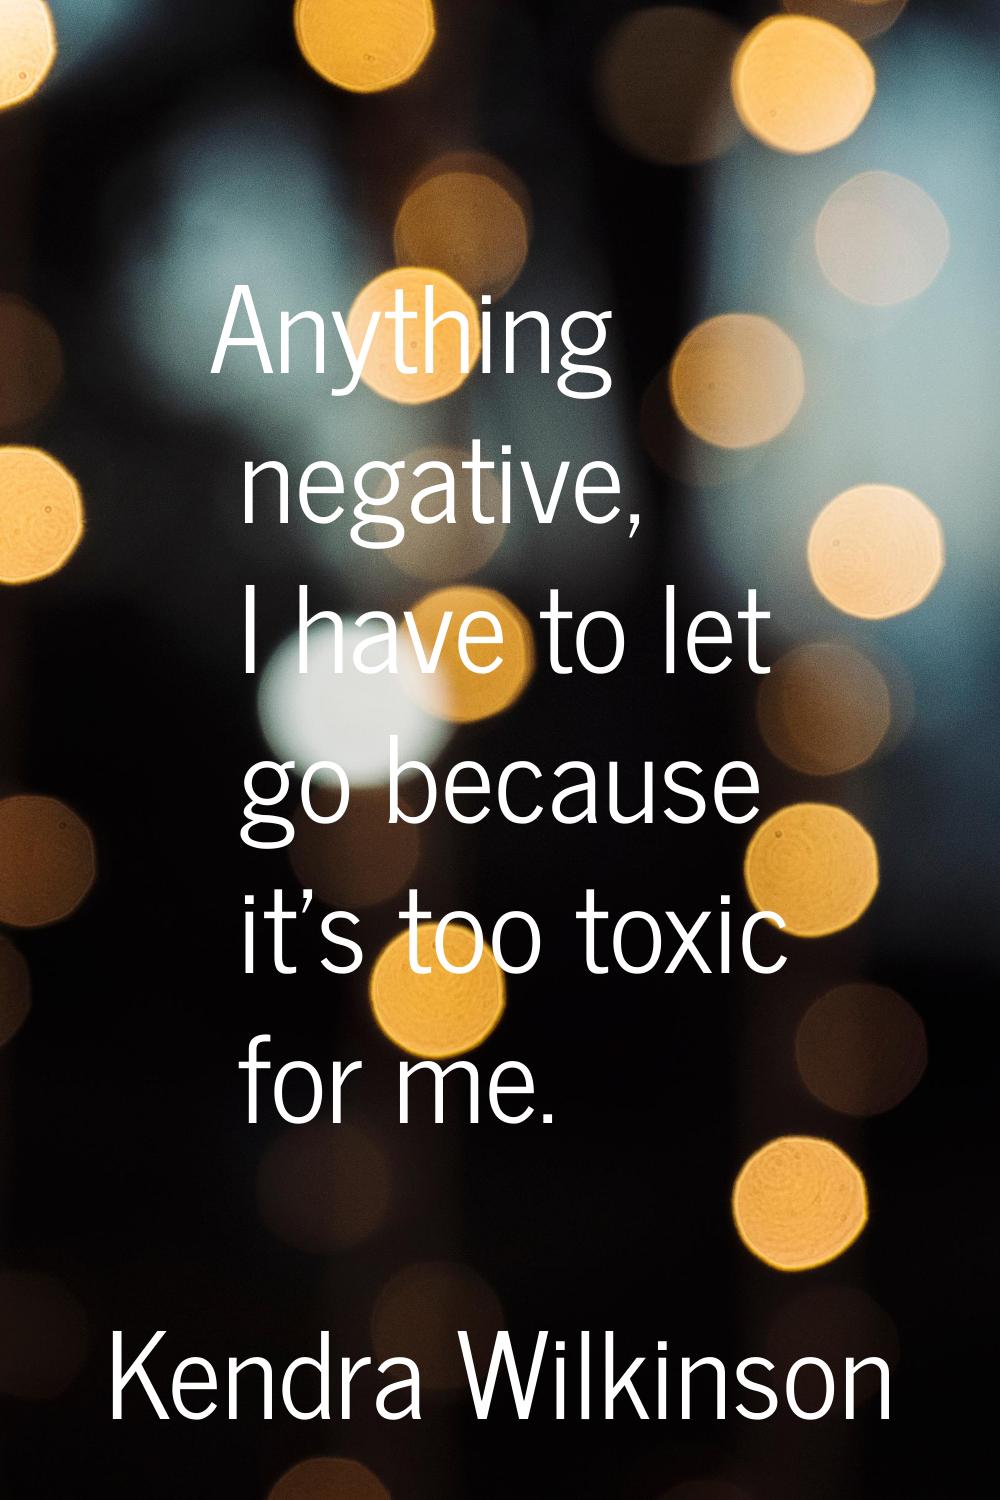 Anything negative, I have to let go because it's too toxic for me.